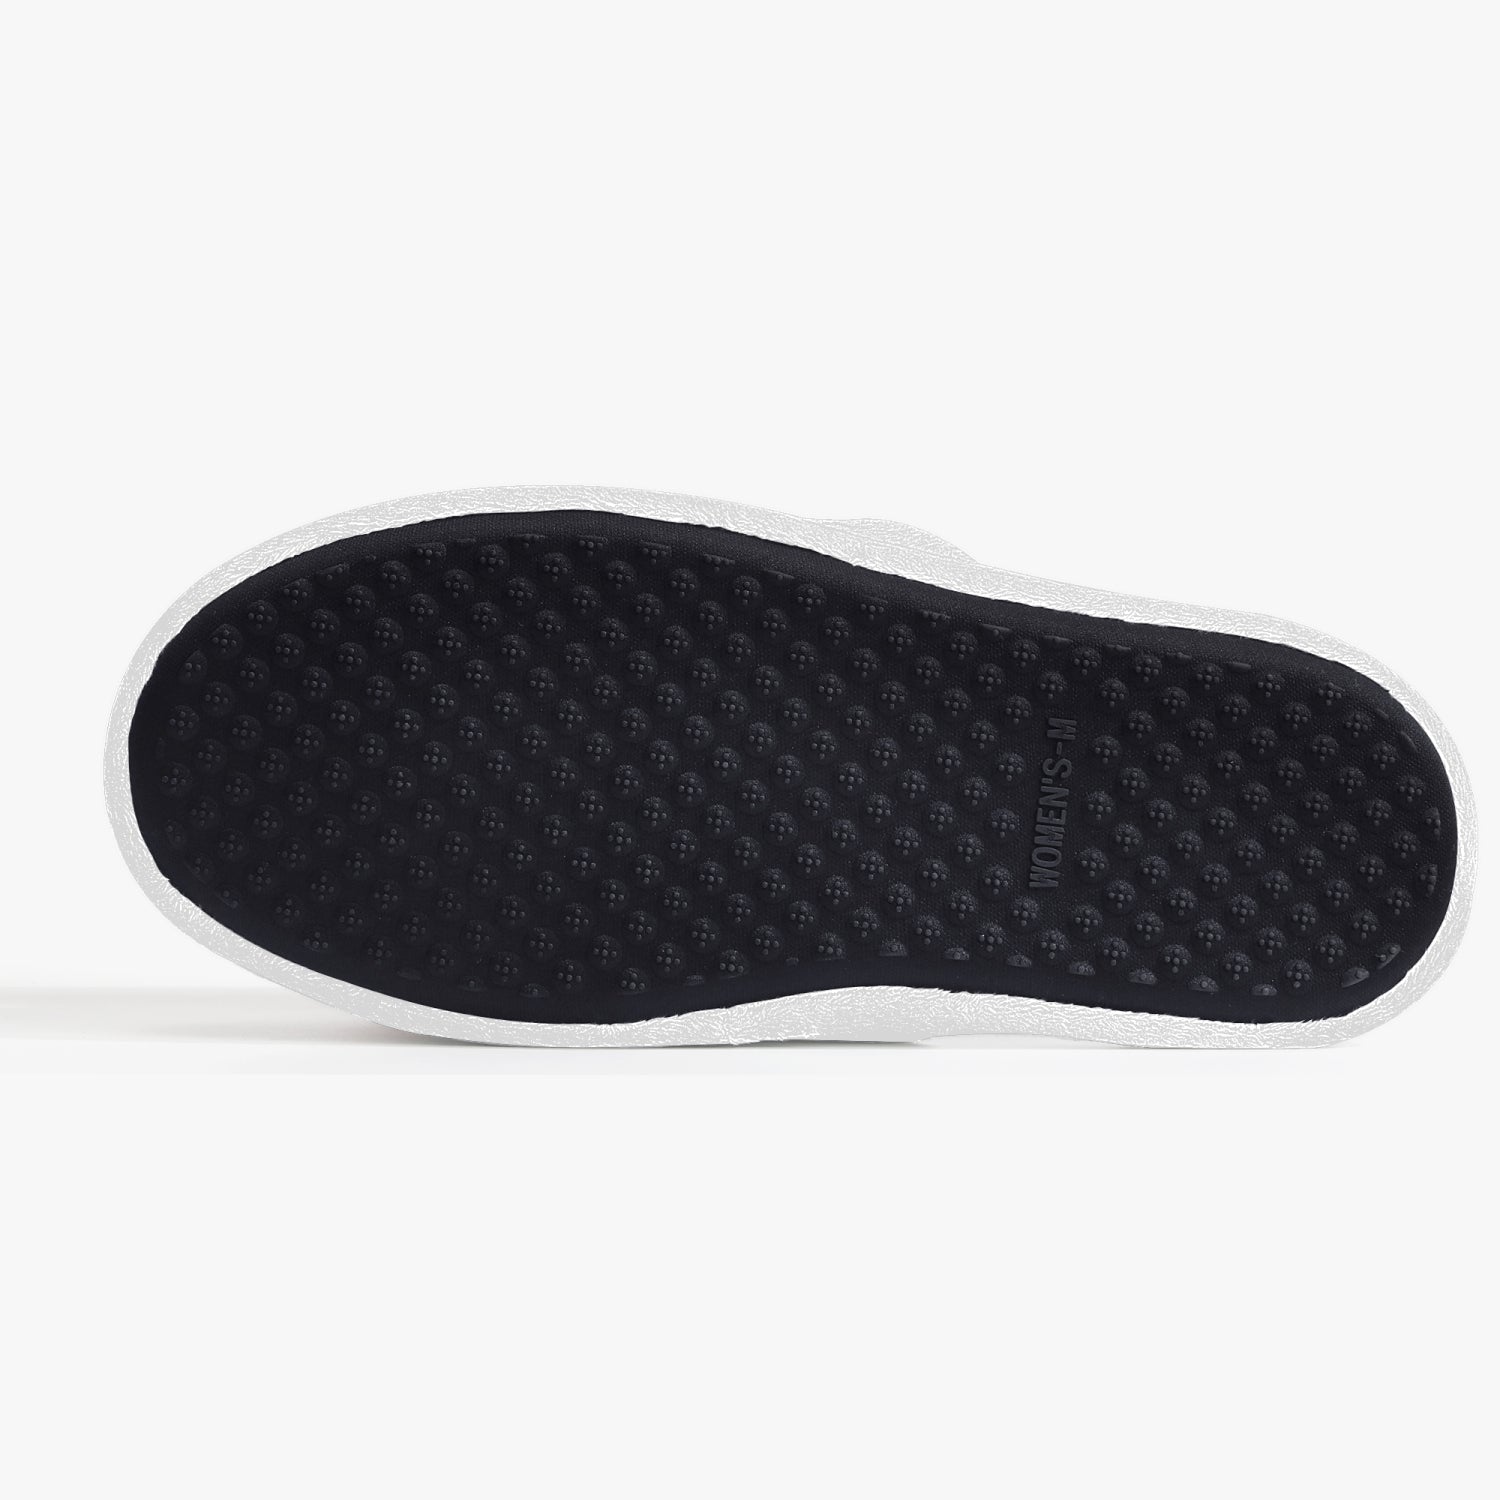 TechSoup Classic Cotton Slippers (FREE SHIPPING)